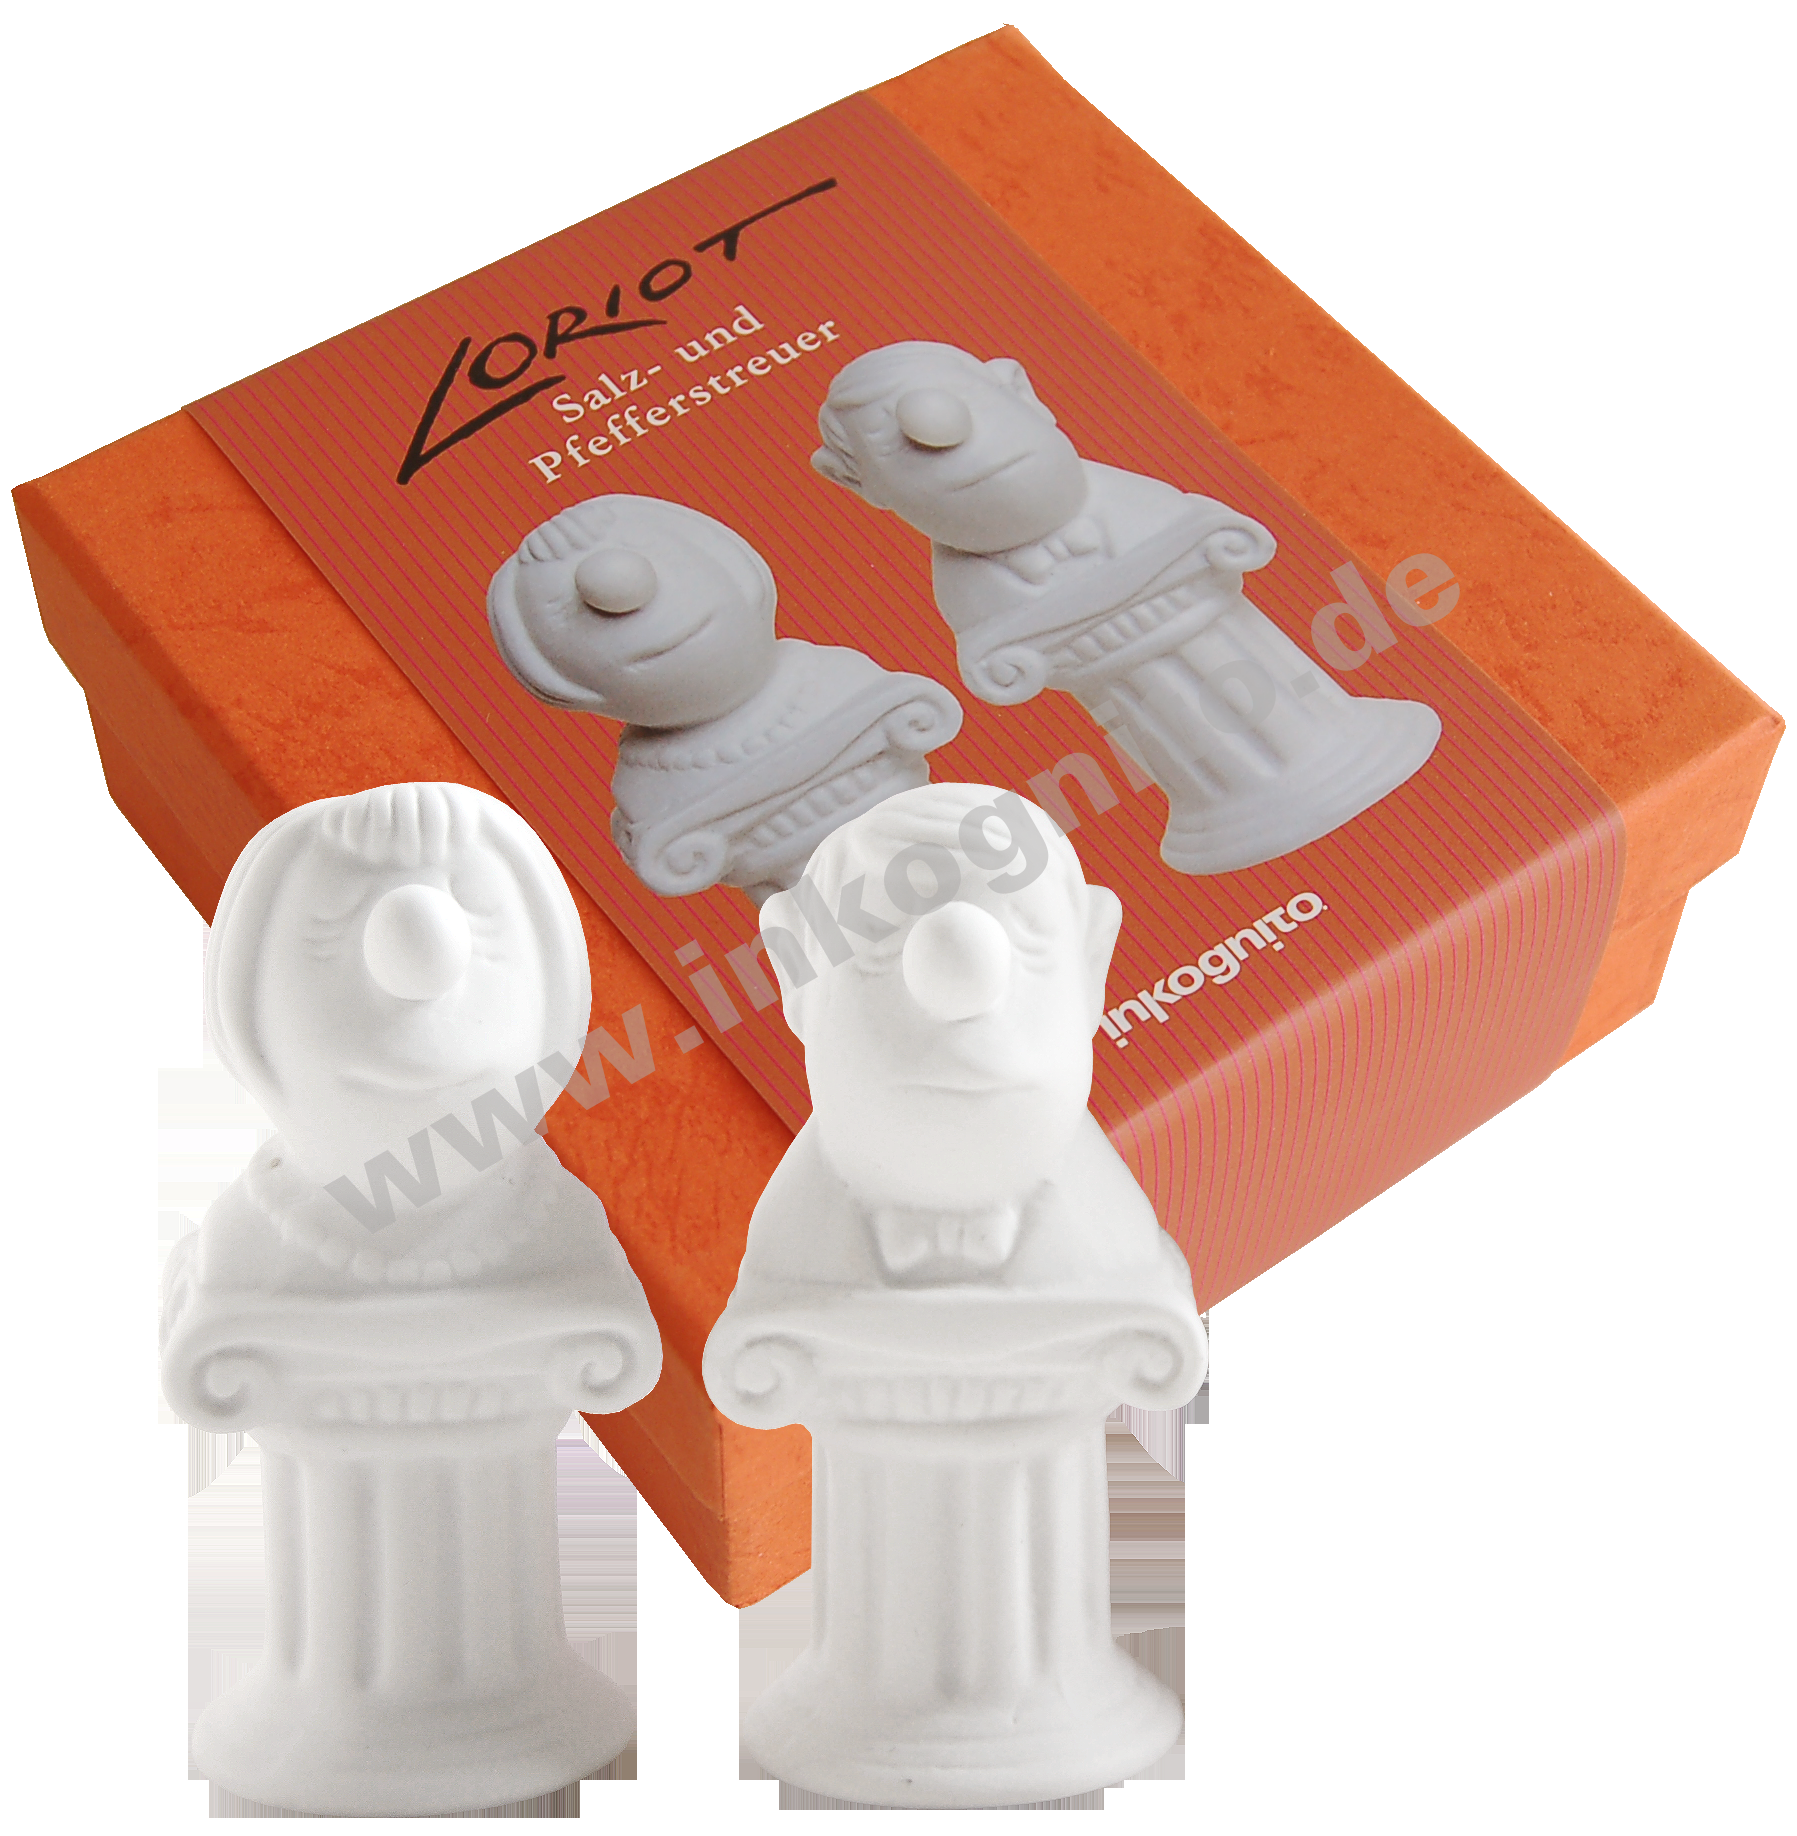 Salt and pepper shaker by Loriot